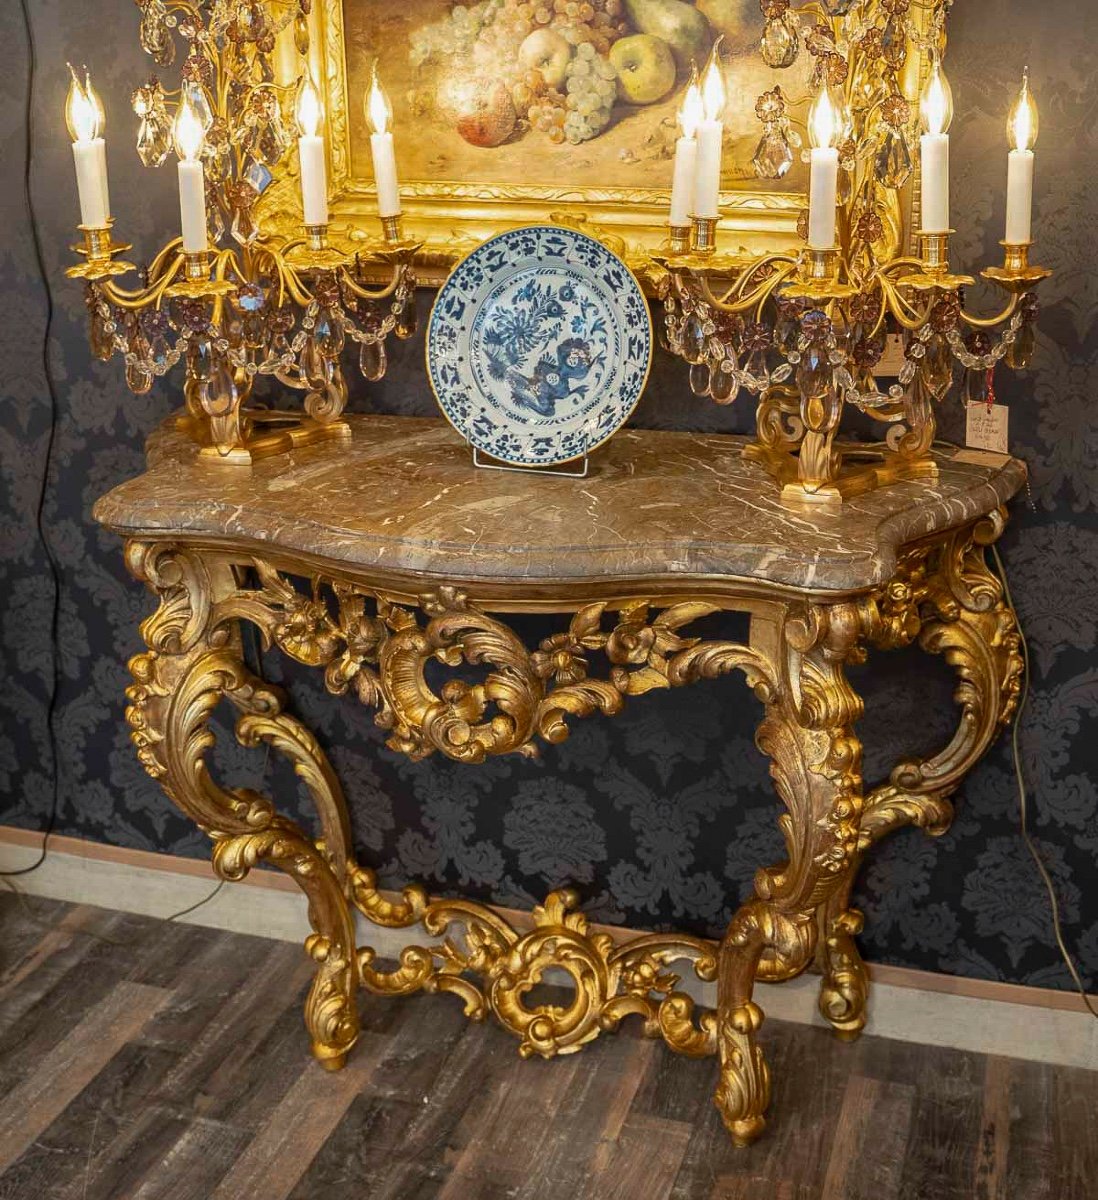 Carved Openwork And Gilded Wood Console With Rocaille Decoration, Italy, Late 18th Century-photo-6